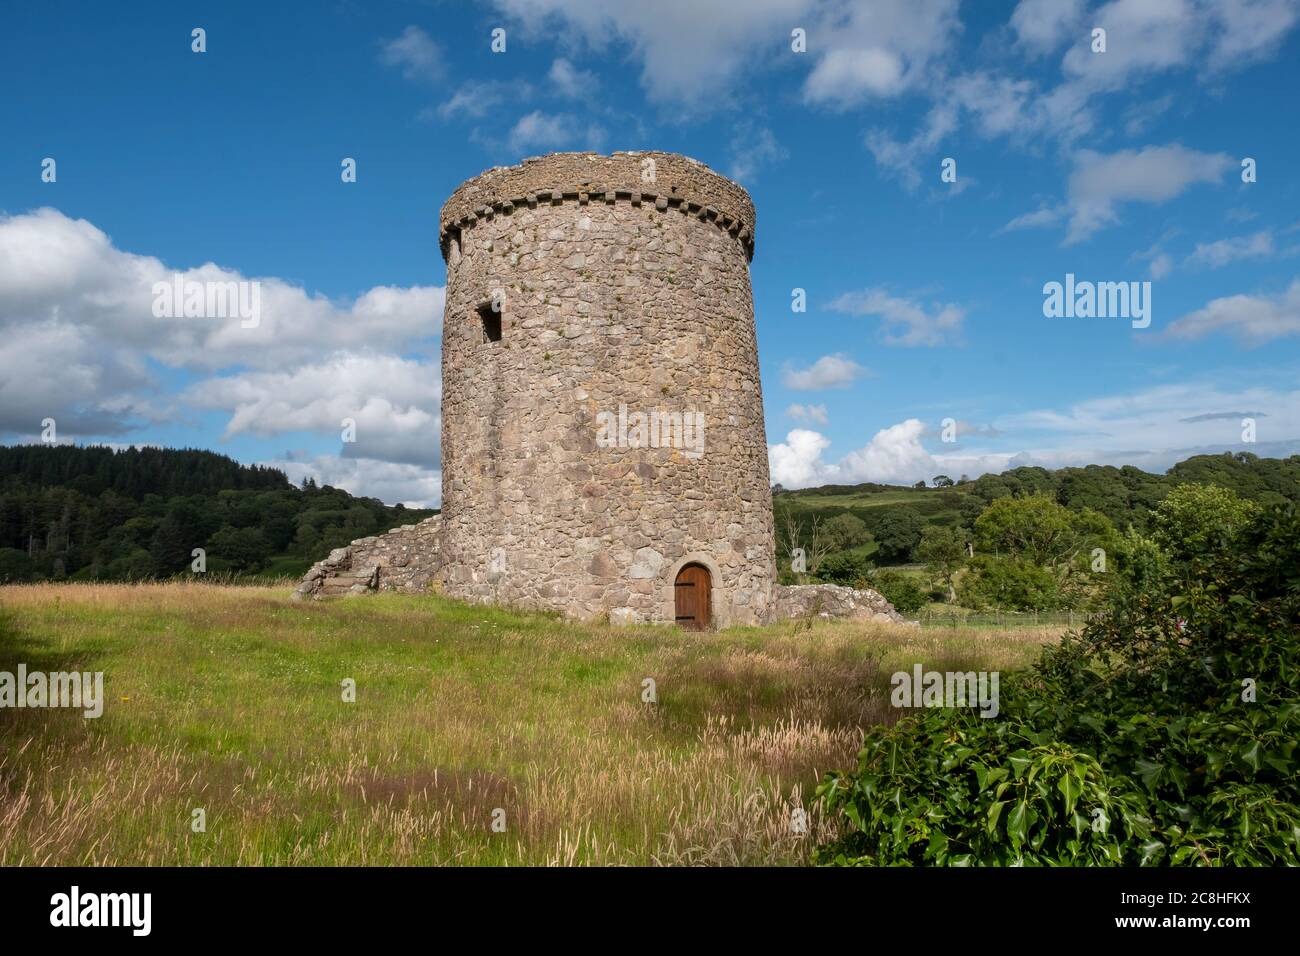 Orchardton Tower ruined tower house in Kirkcudbrightshire, Dumfries and Galloway, Scotland. Stock Photo